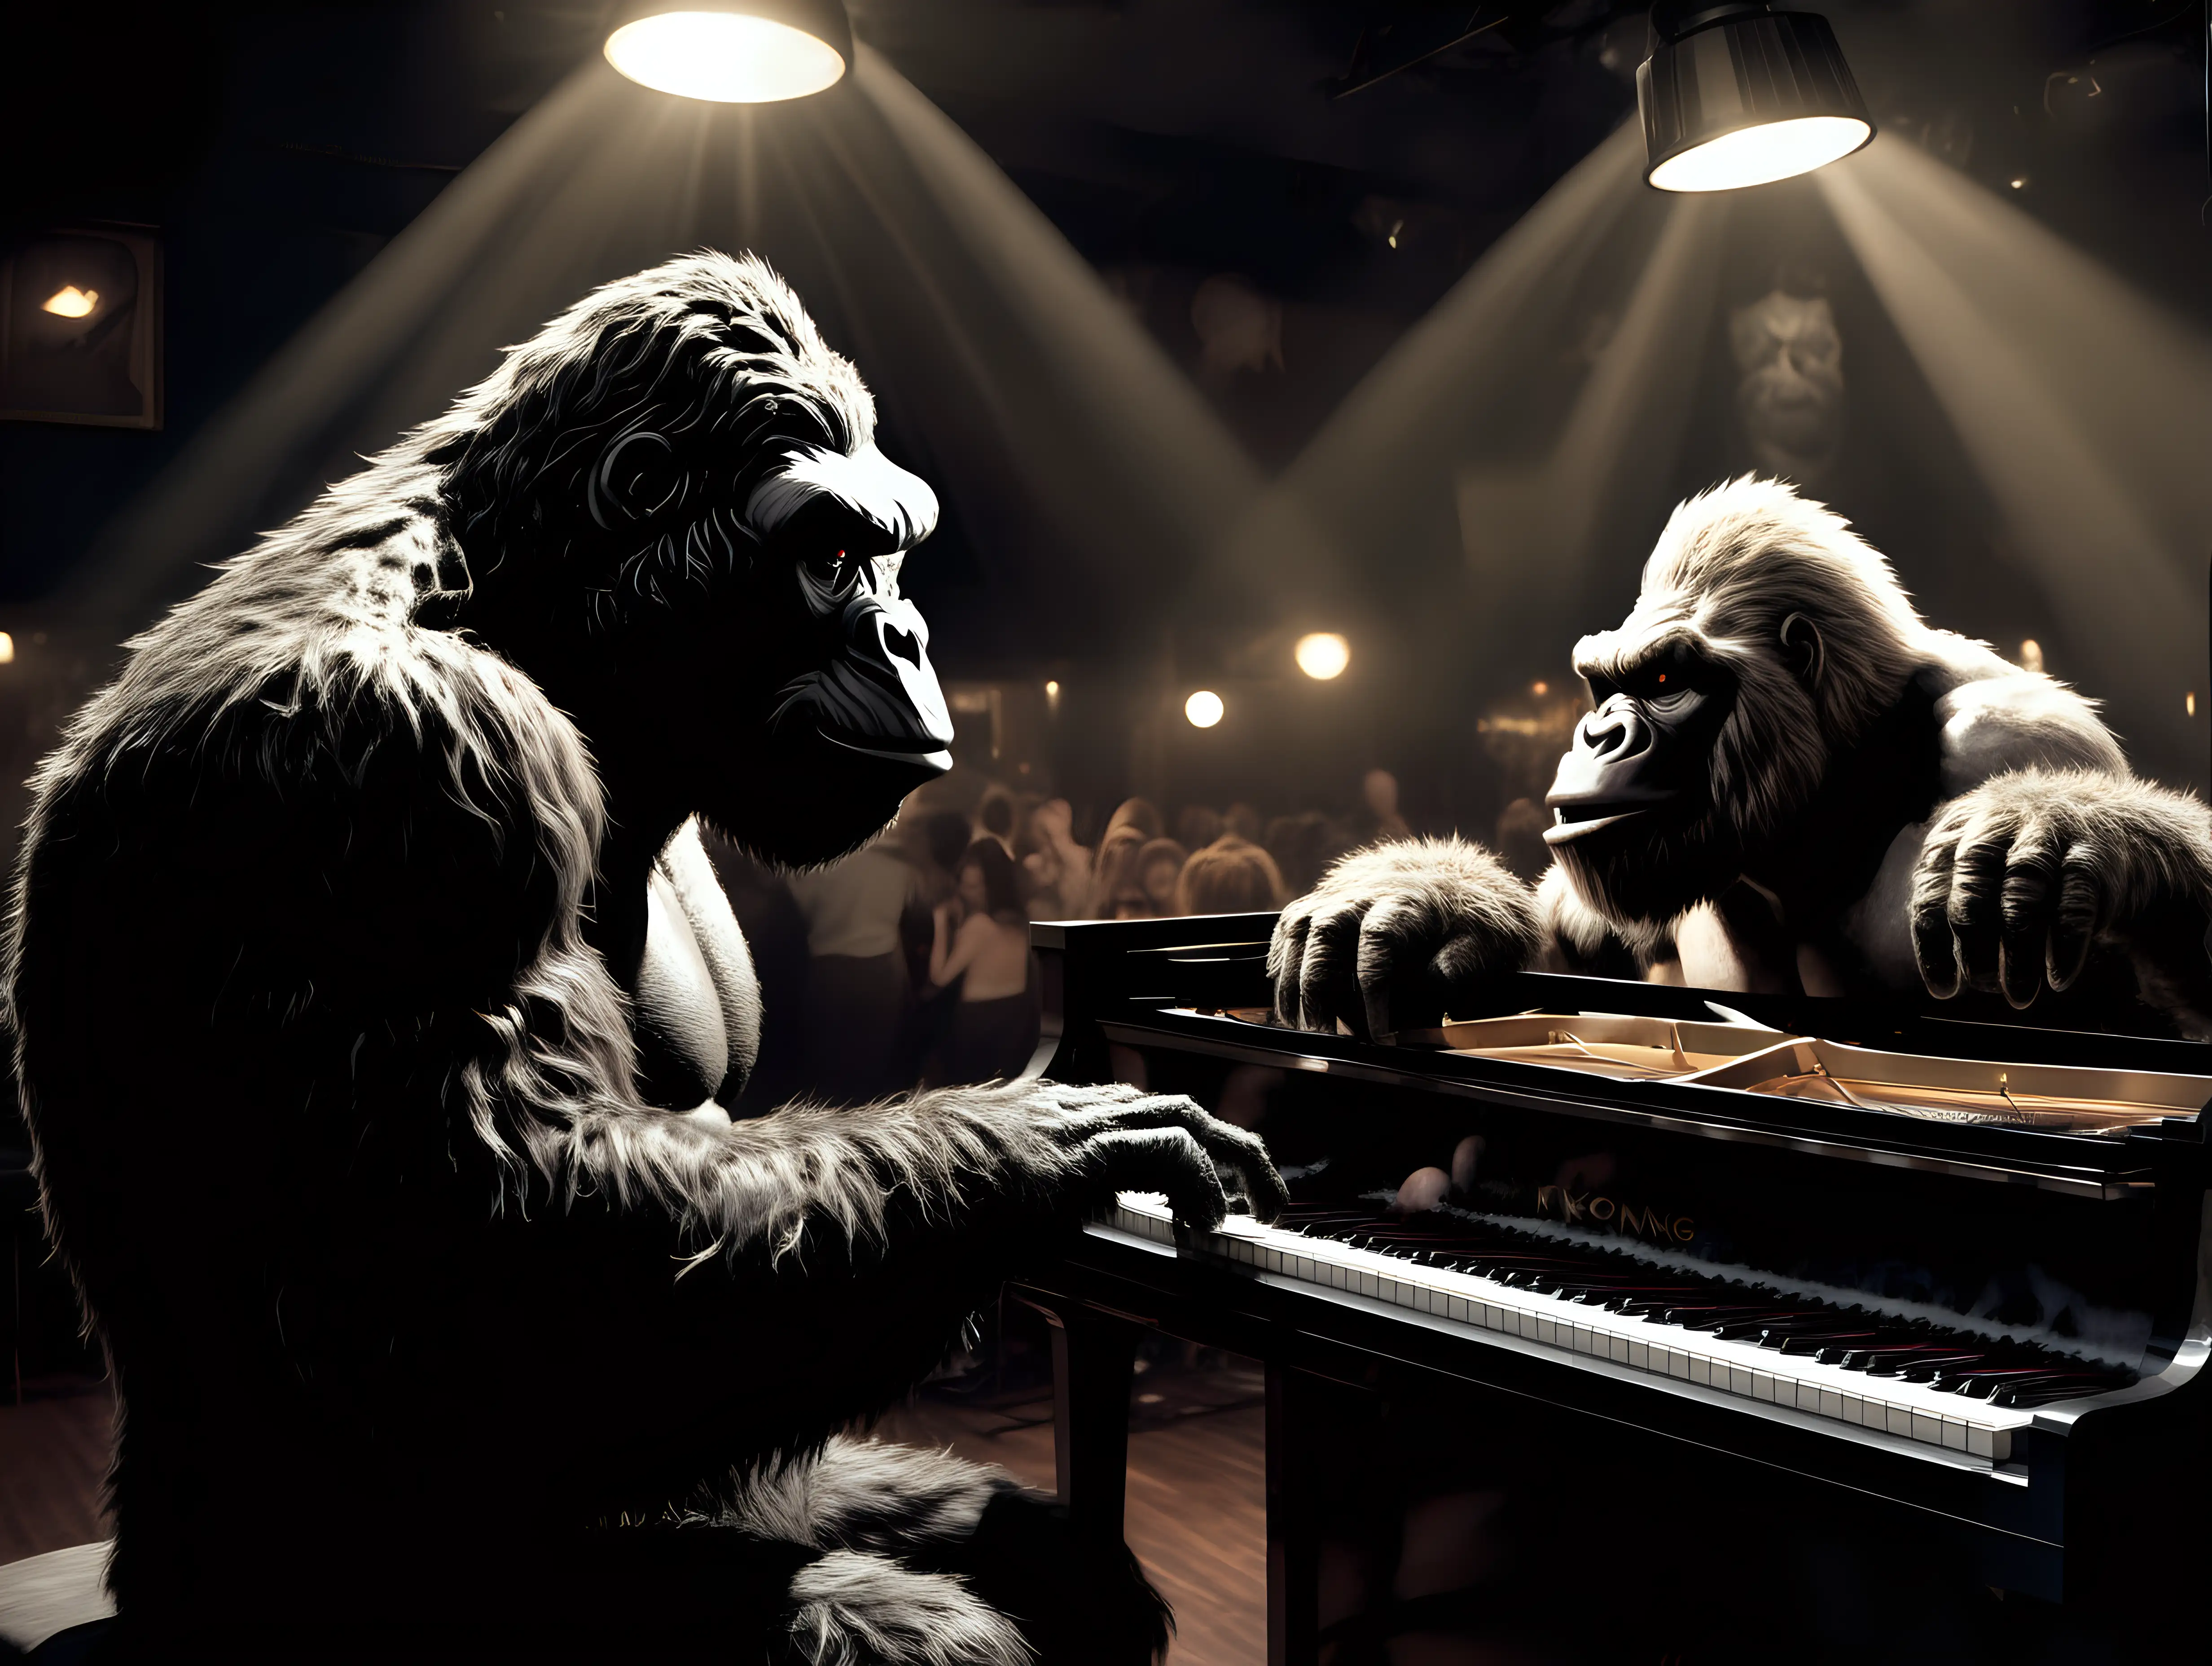 Monstrous Duet King Kong and Wolfman Jazz Up the Night Club